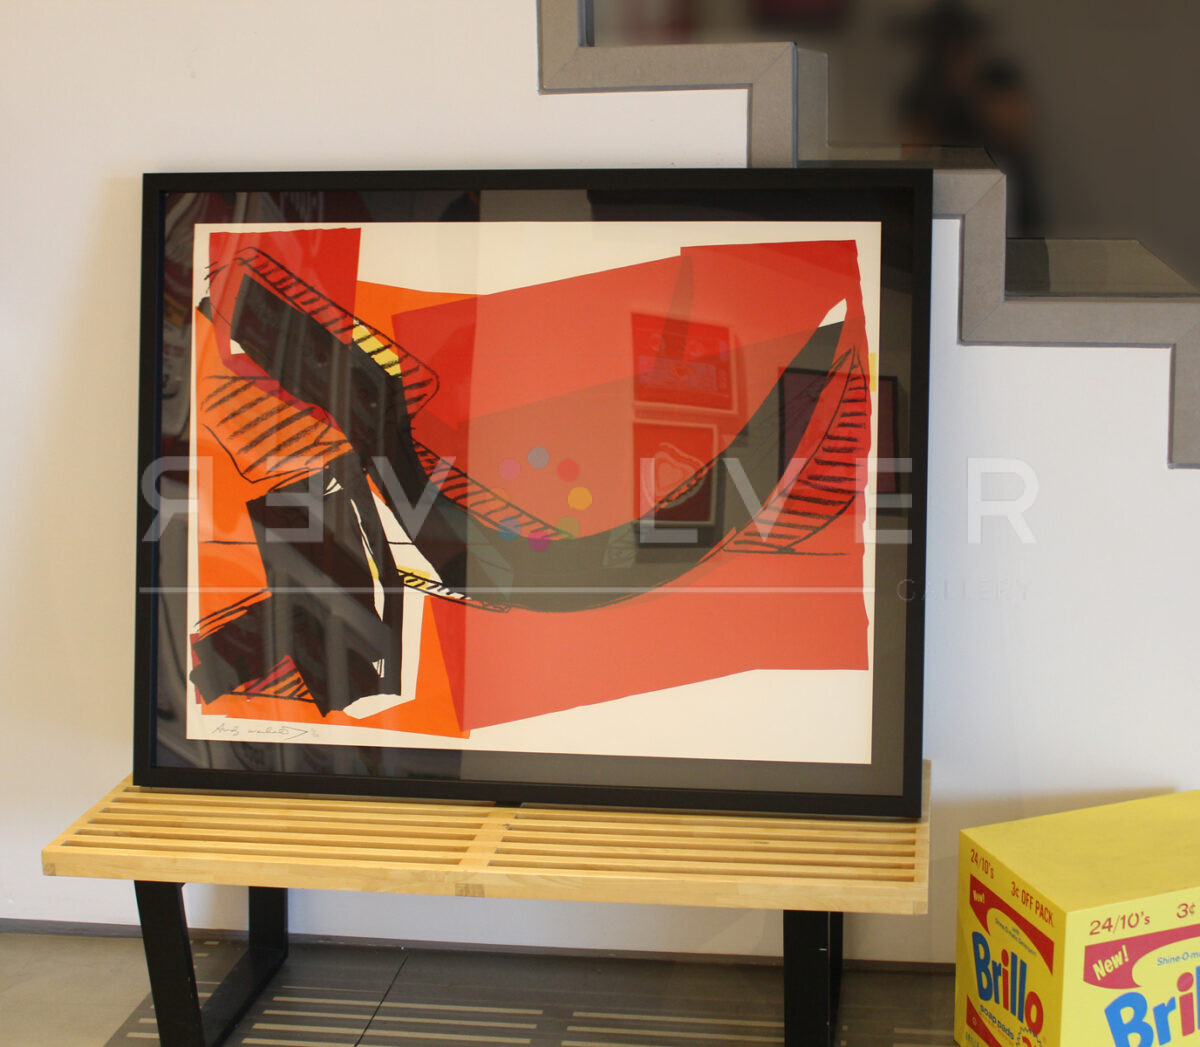 Hammer and Sickle 163 by Andy Warhol framed at Revolver Gallery.